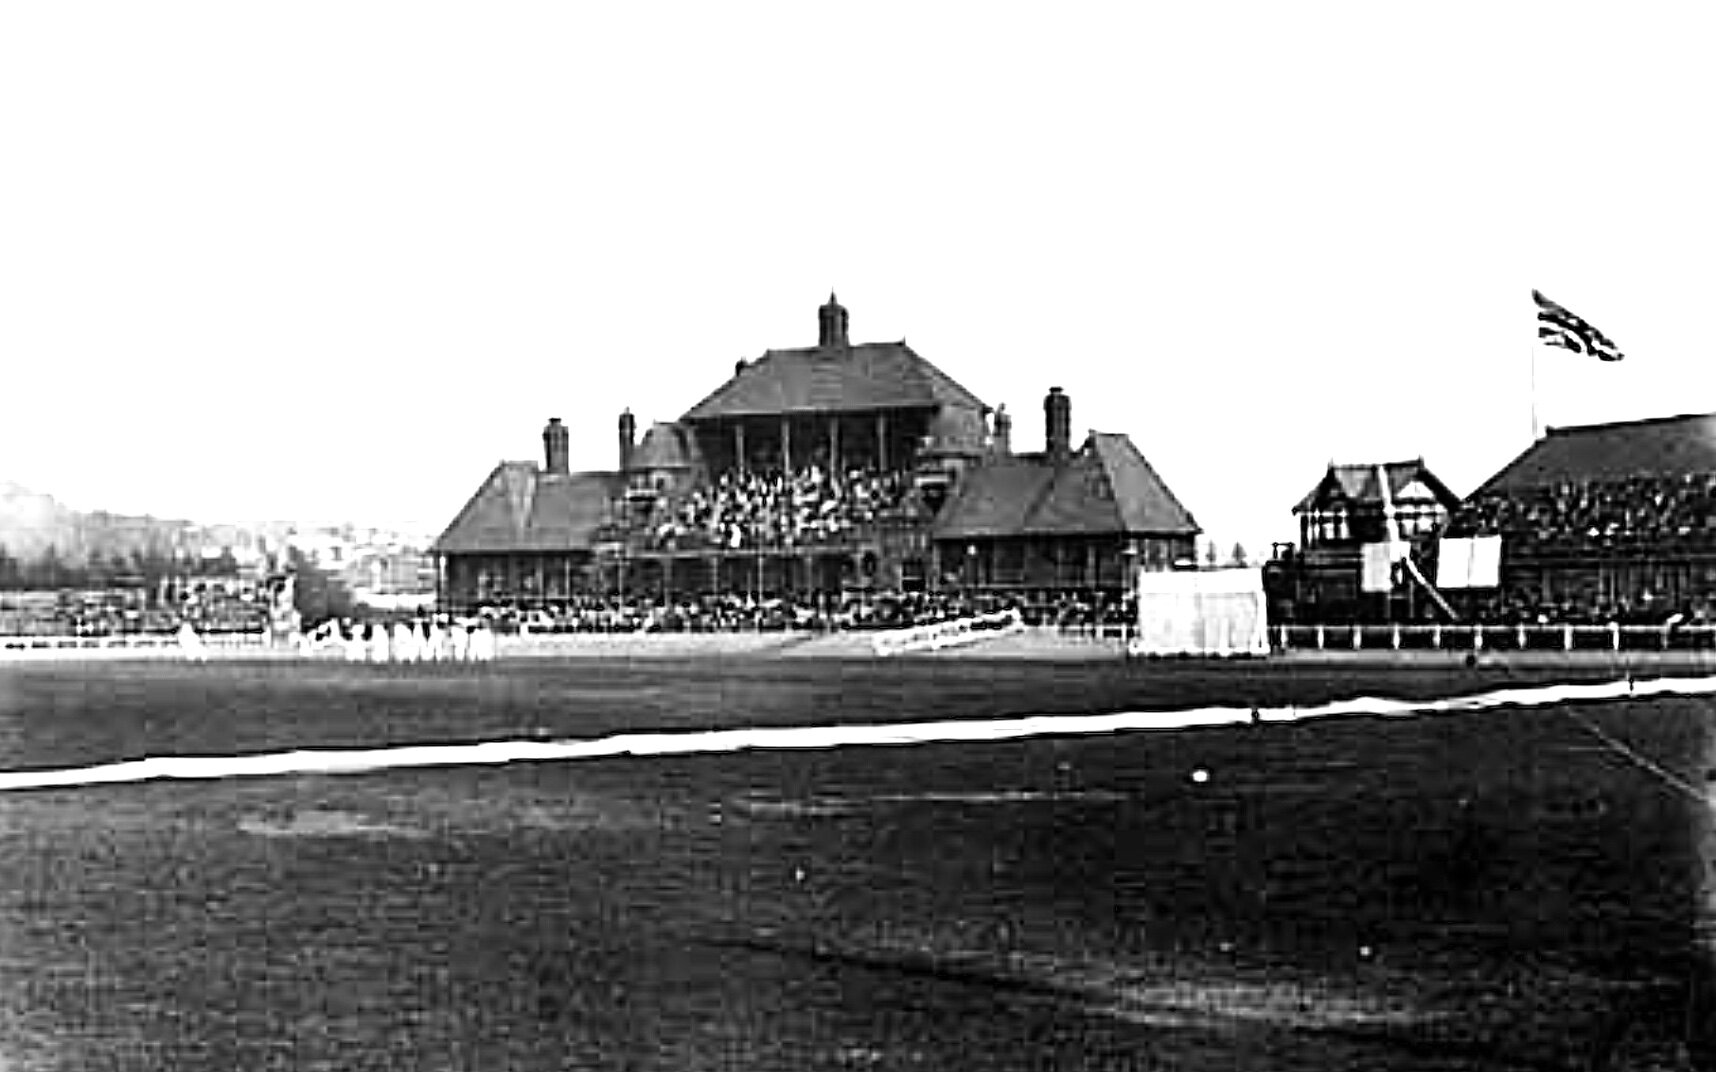 Cricket Ground and Pavilion, early 1900s  